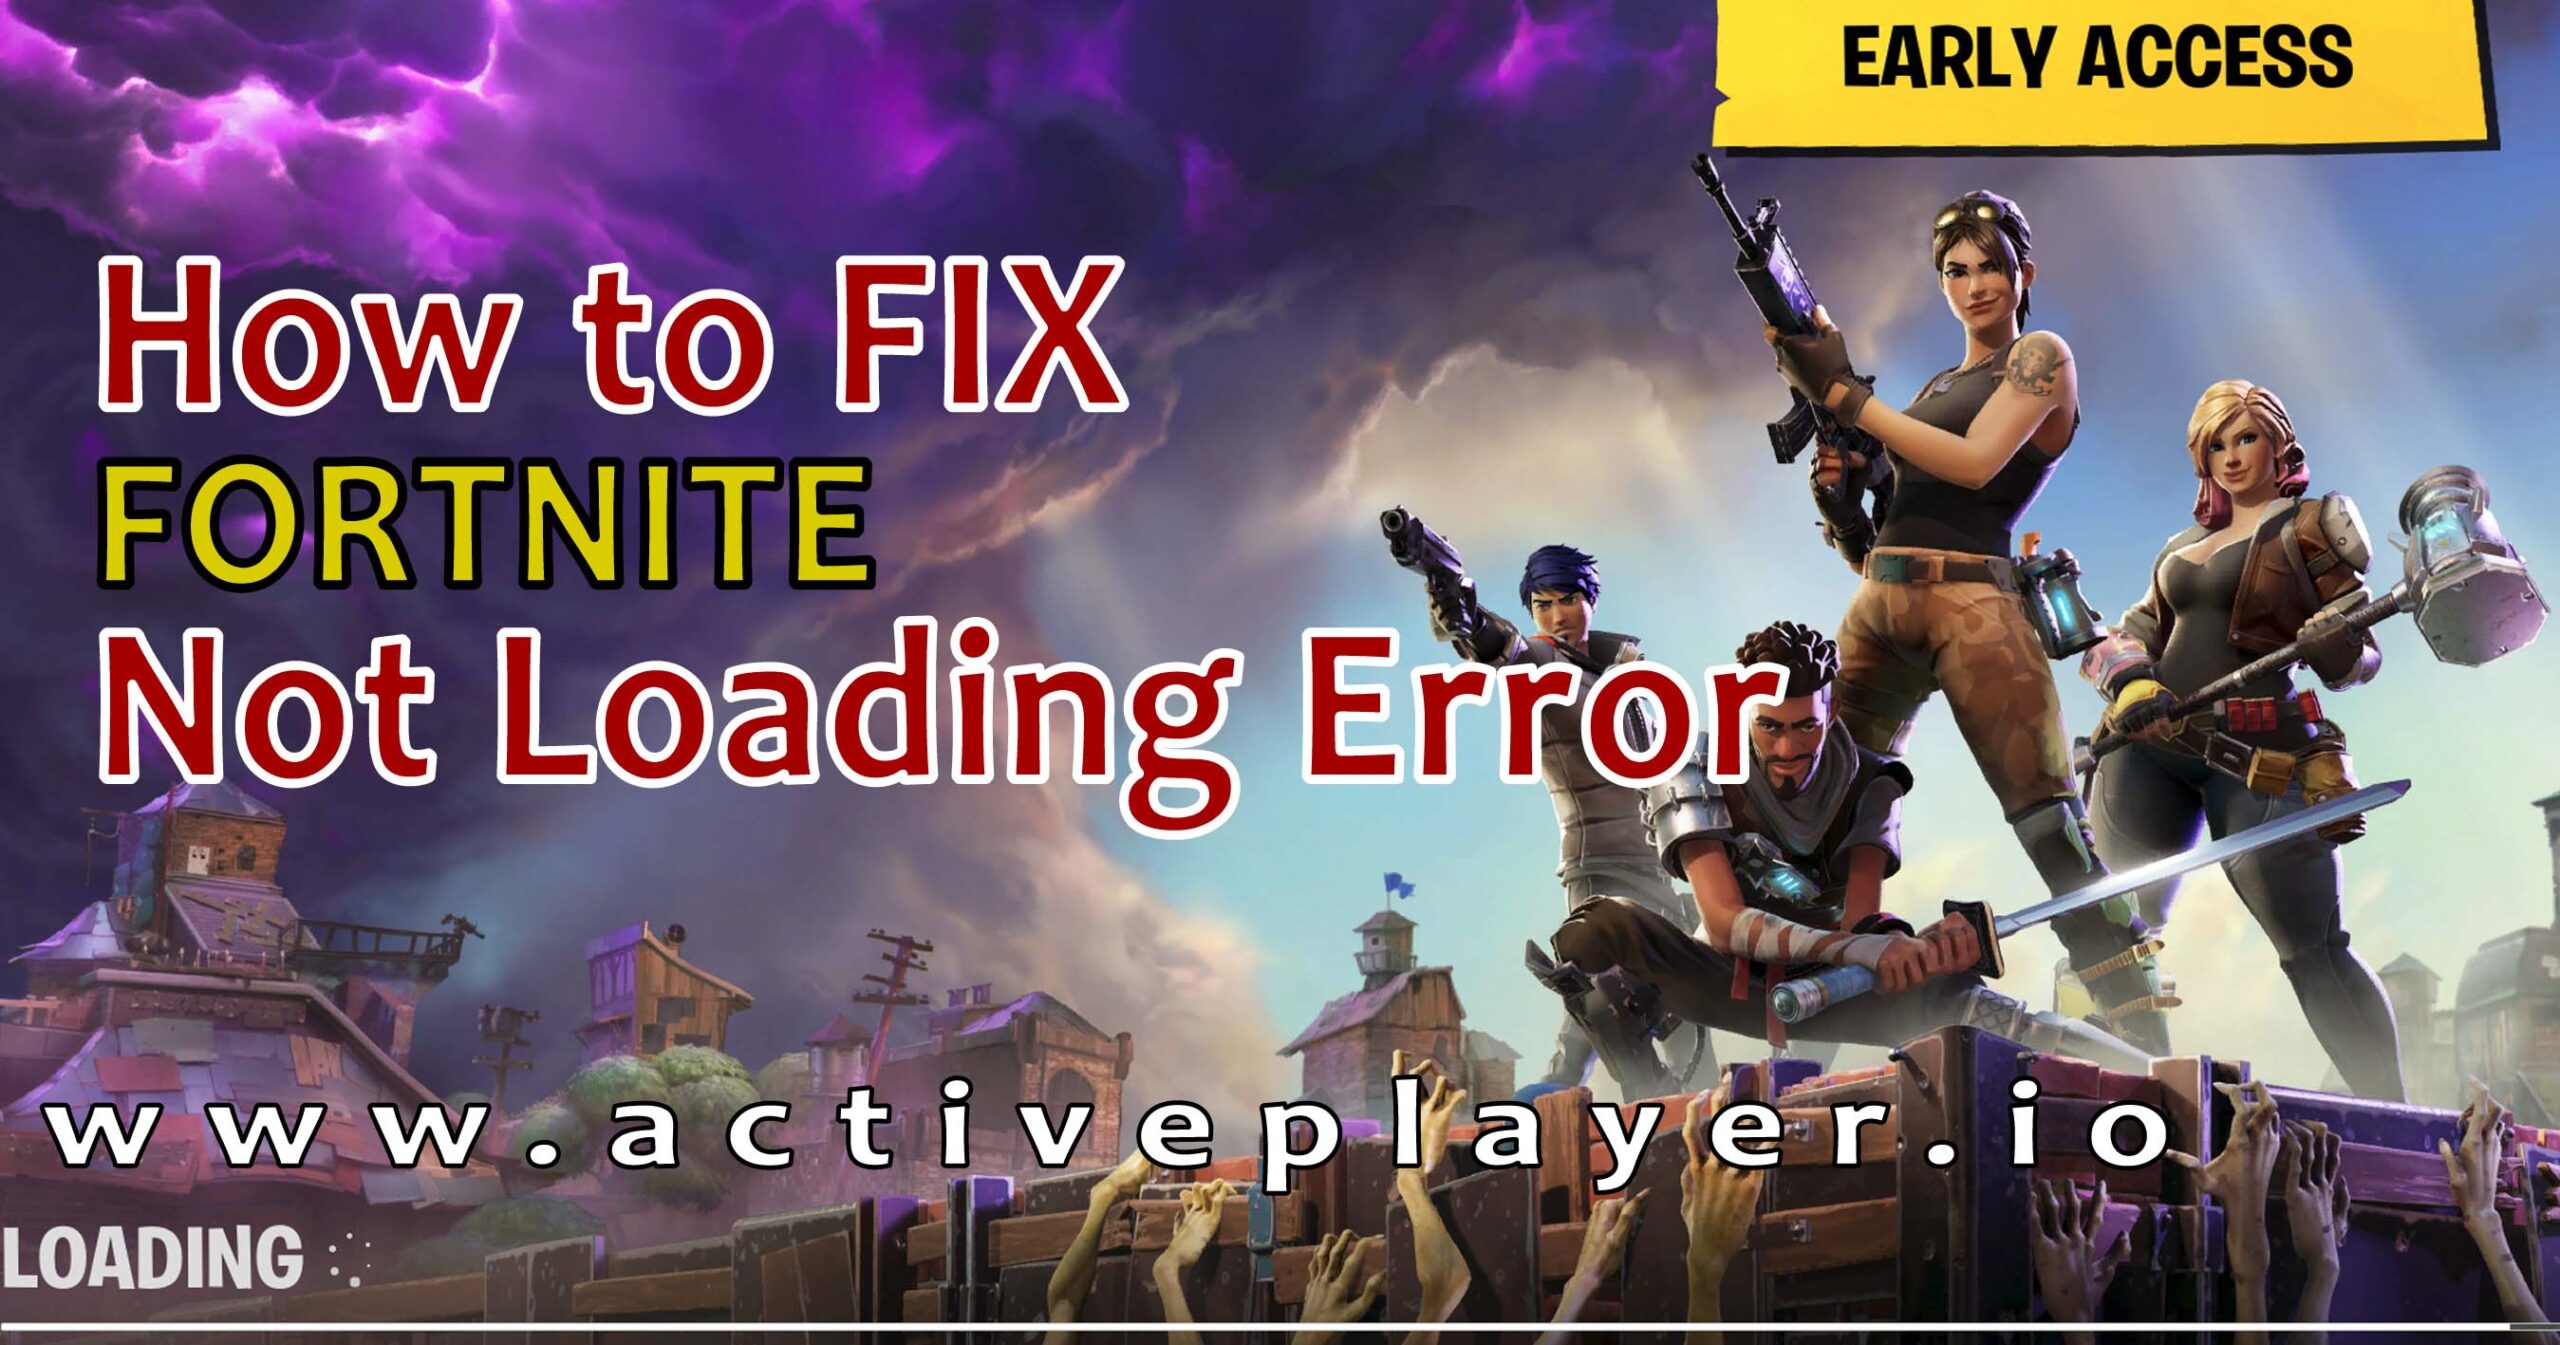 ROBLOX takes time to load and when it loads, multiple errors